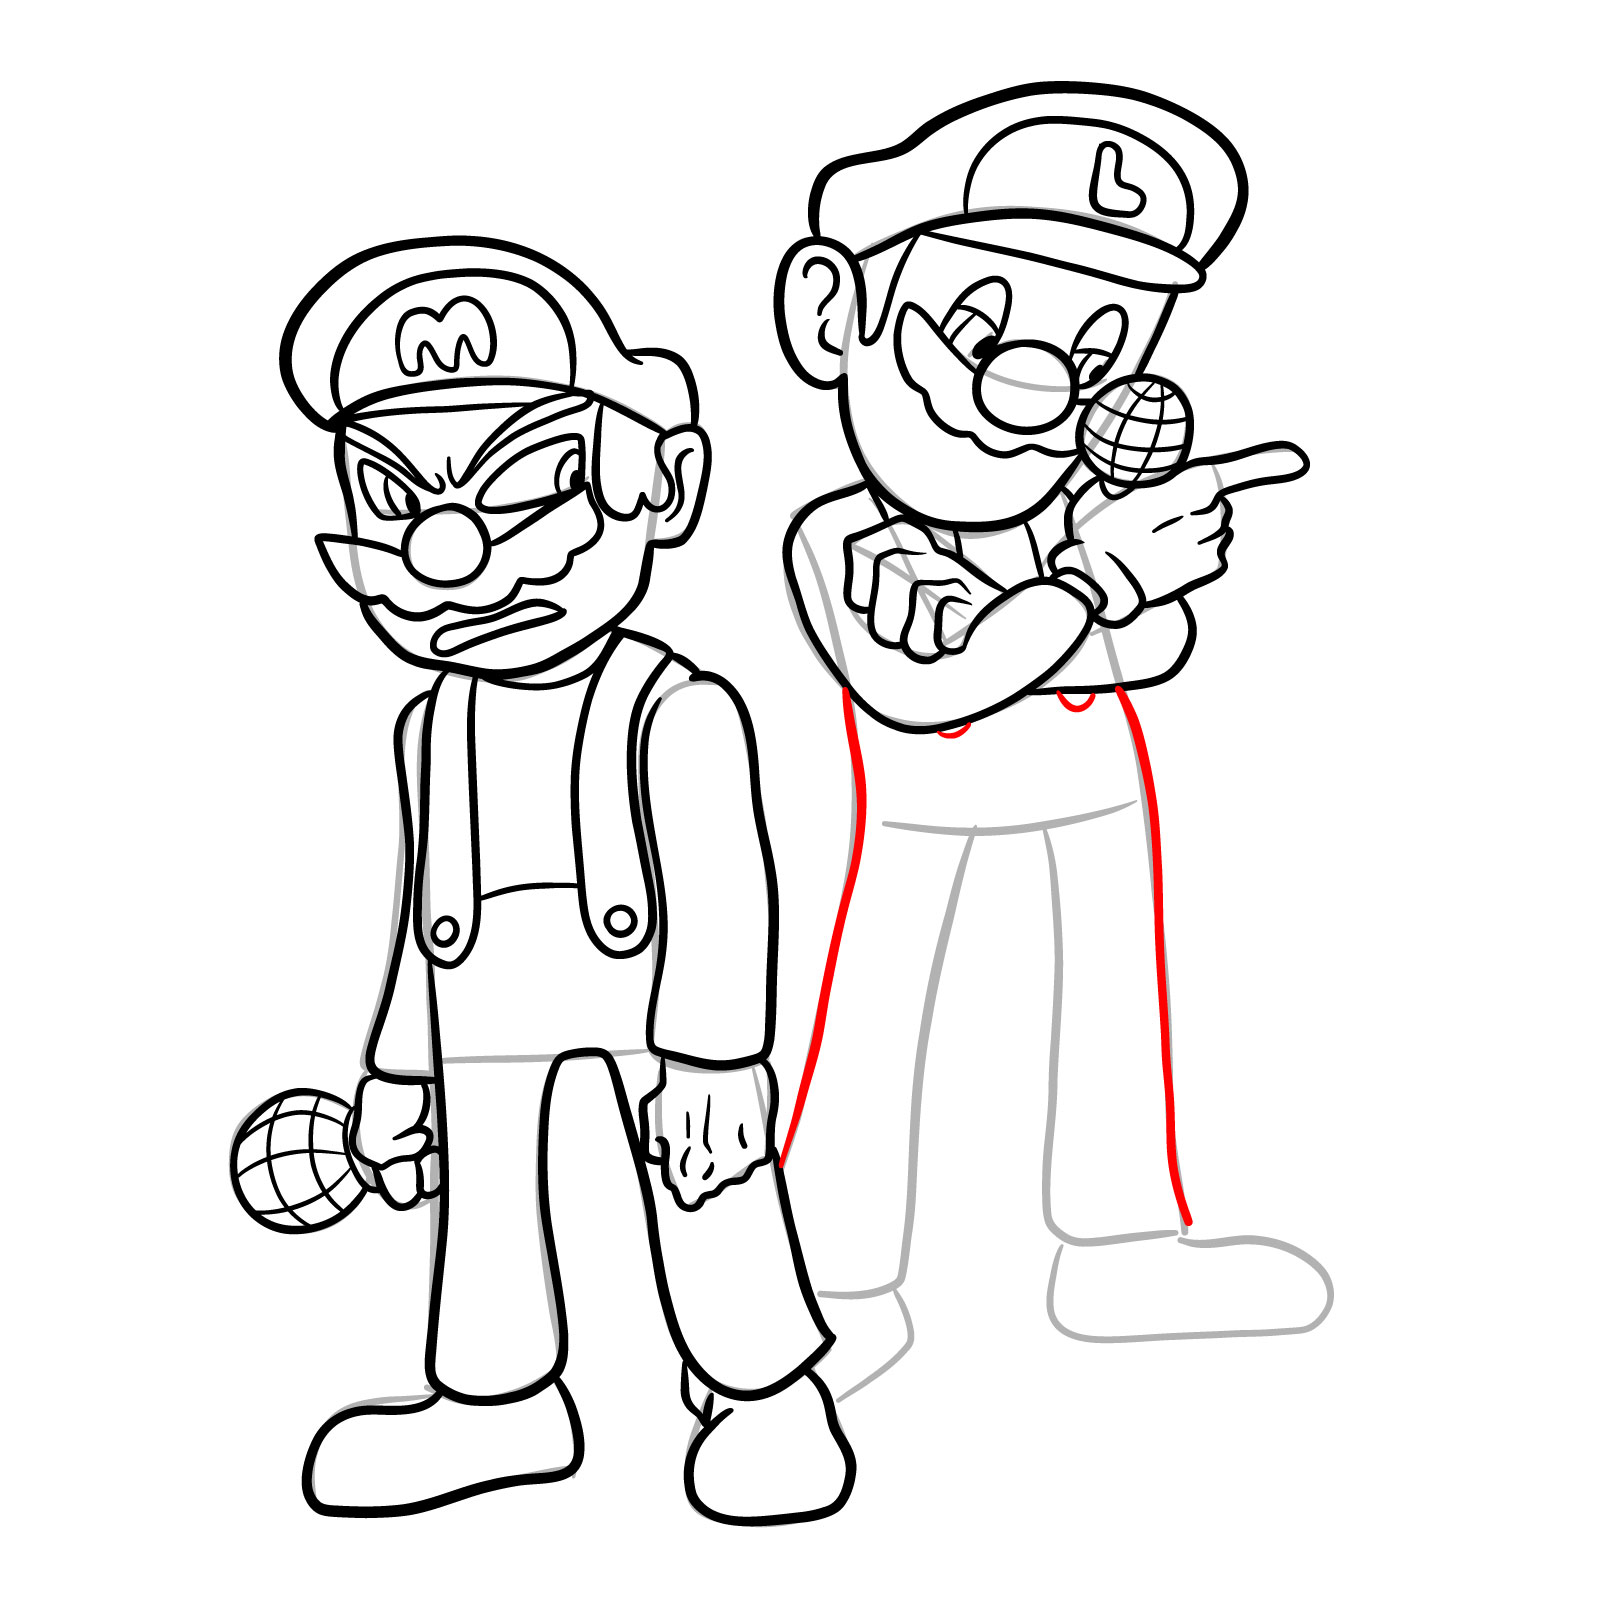 How to draw Mario and Luigi from Tails Gets Trolled - step 39